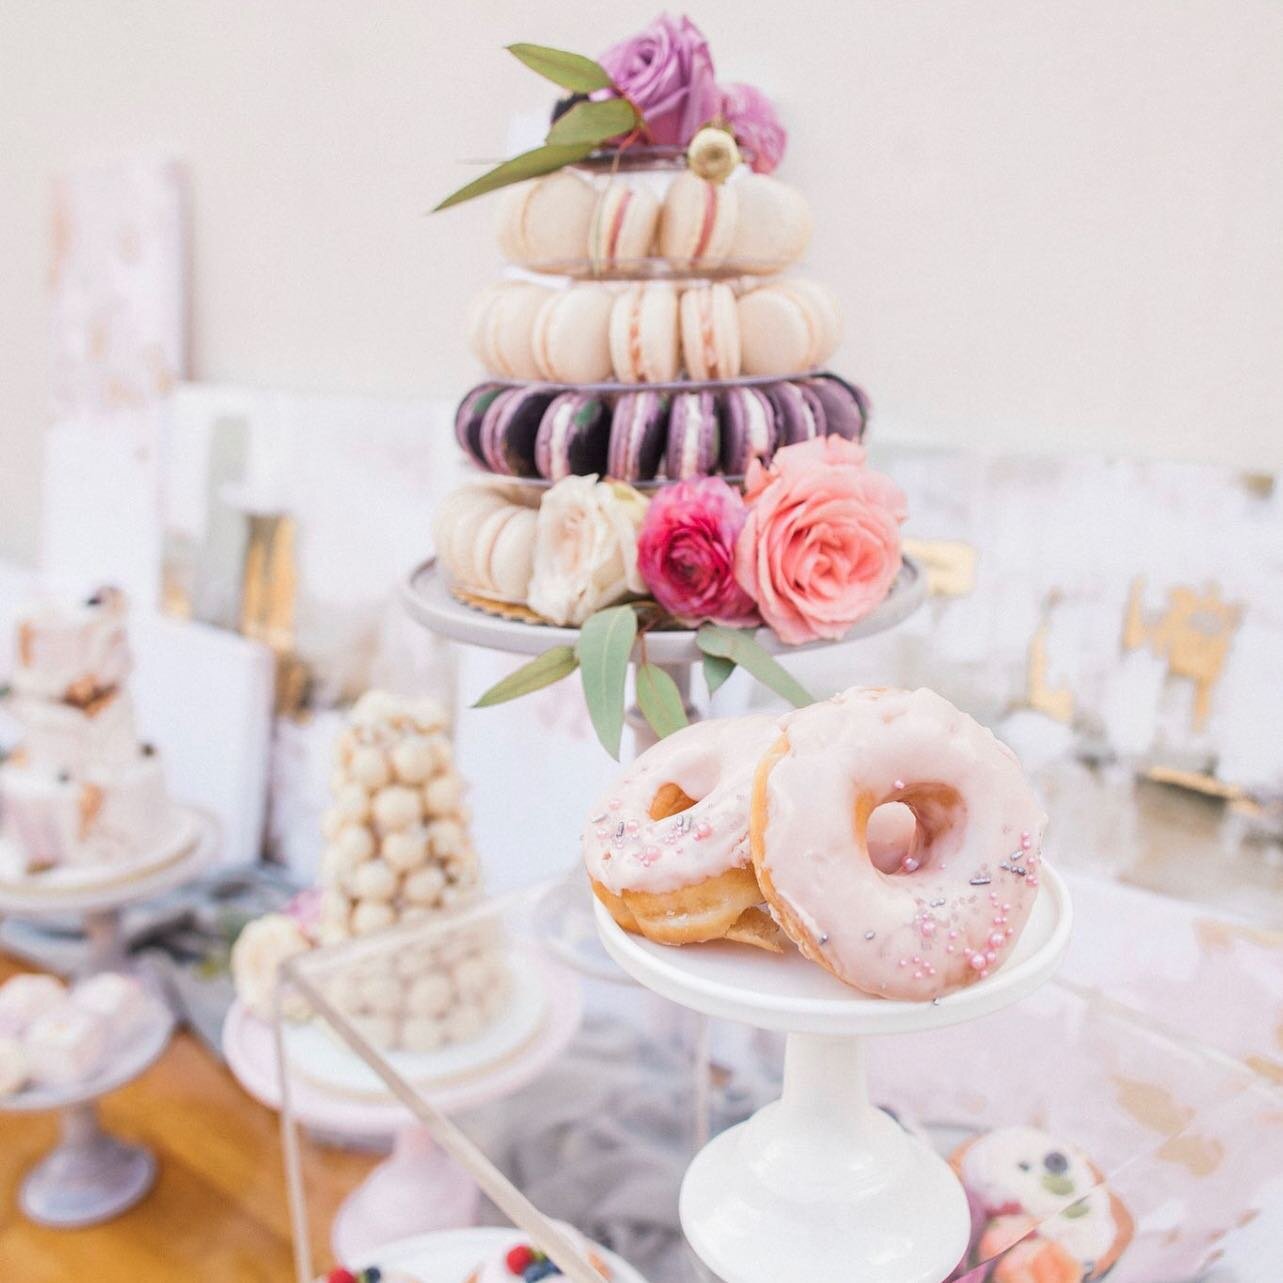 Heading out of town for a much needed getaway. Leaving you with this dreamy dessert bar filled with cake, tartlets, macarons, donuts and a croquembouche.